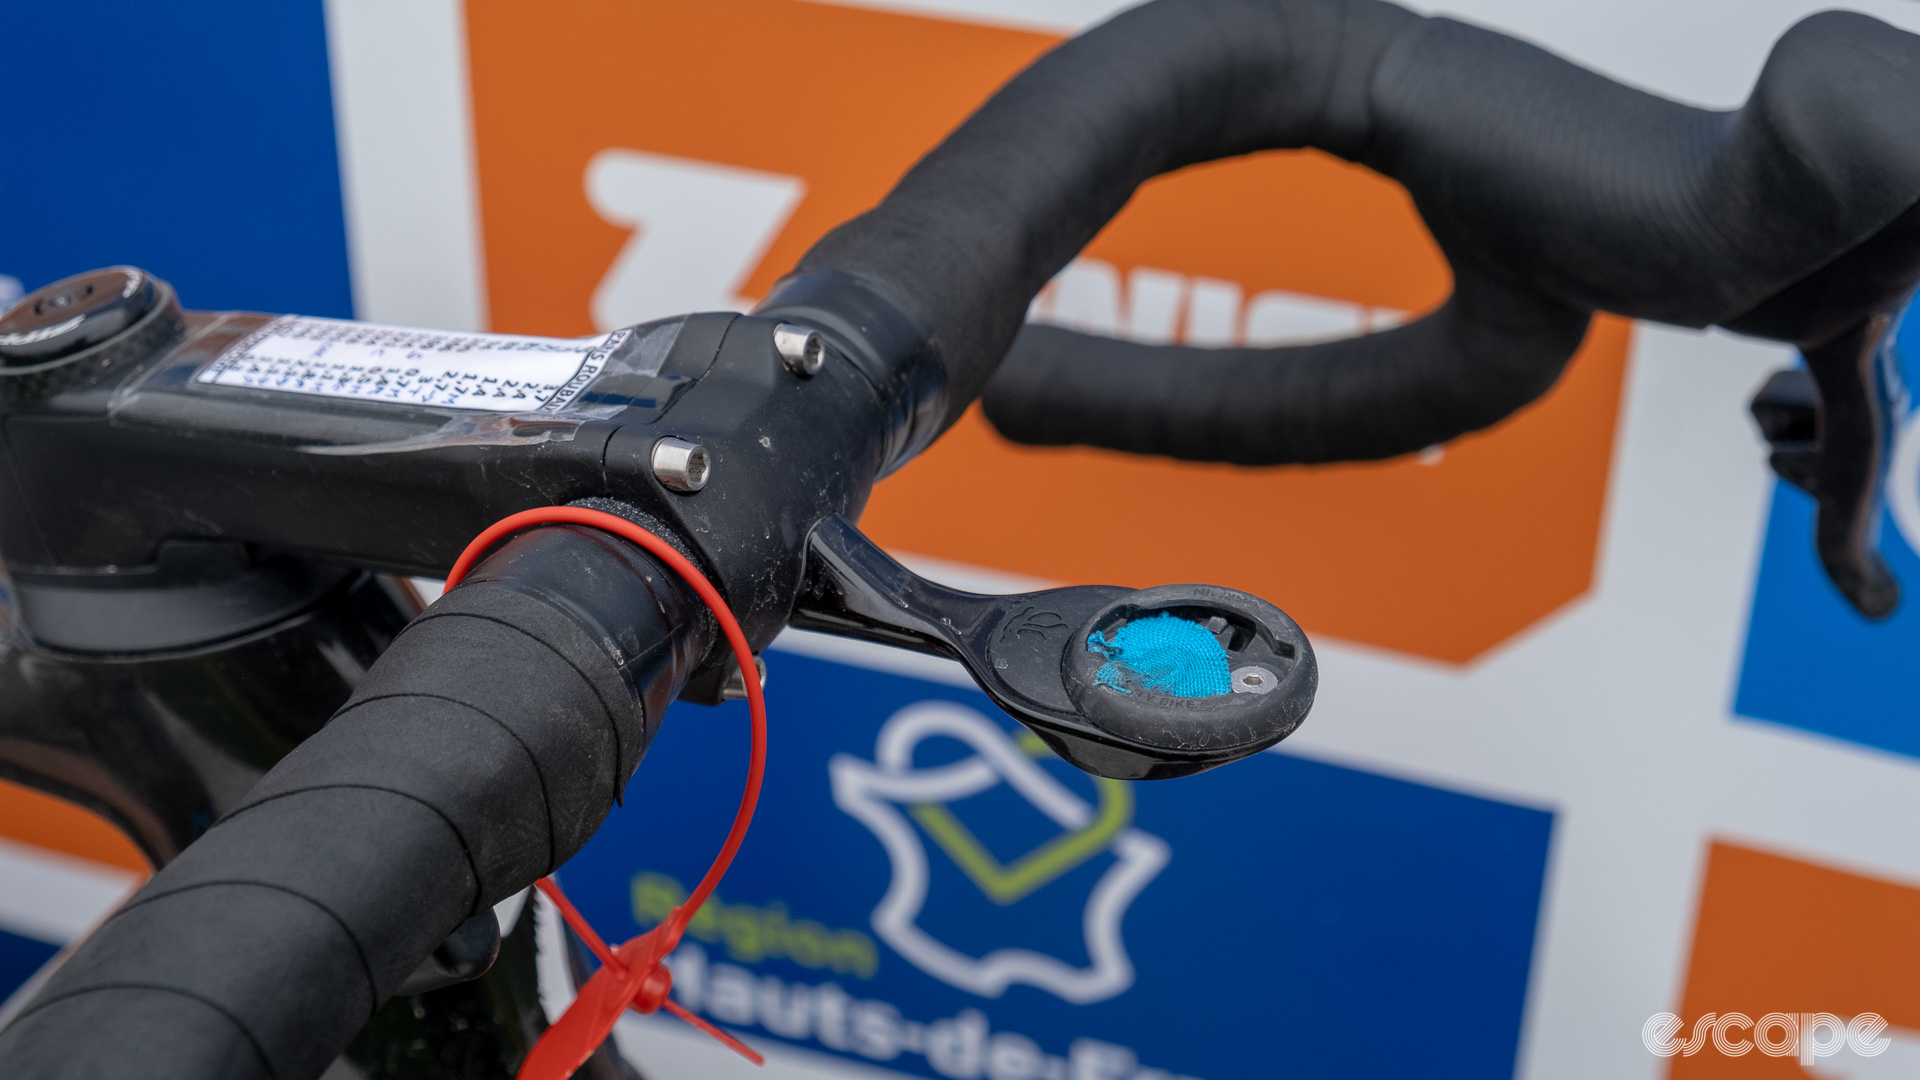 The image shows the tops of Kopecky's handlebars